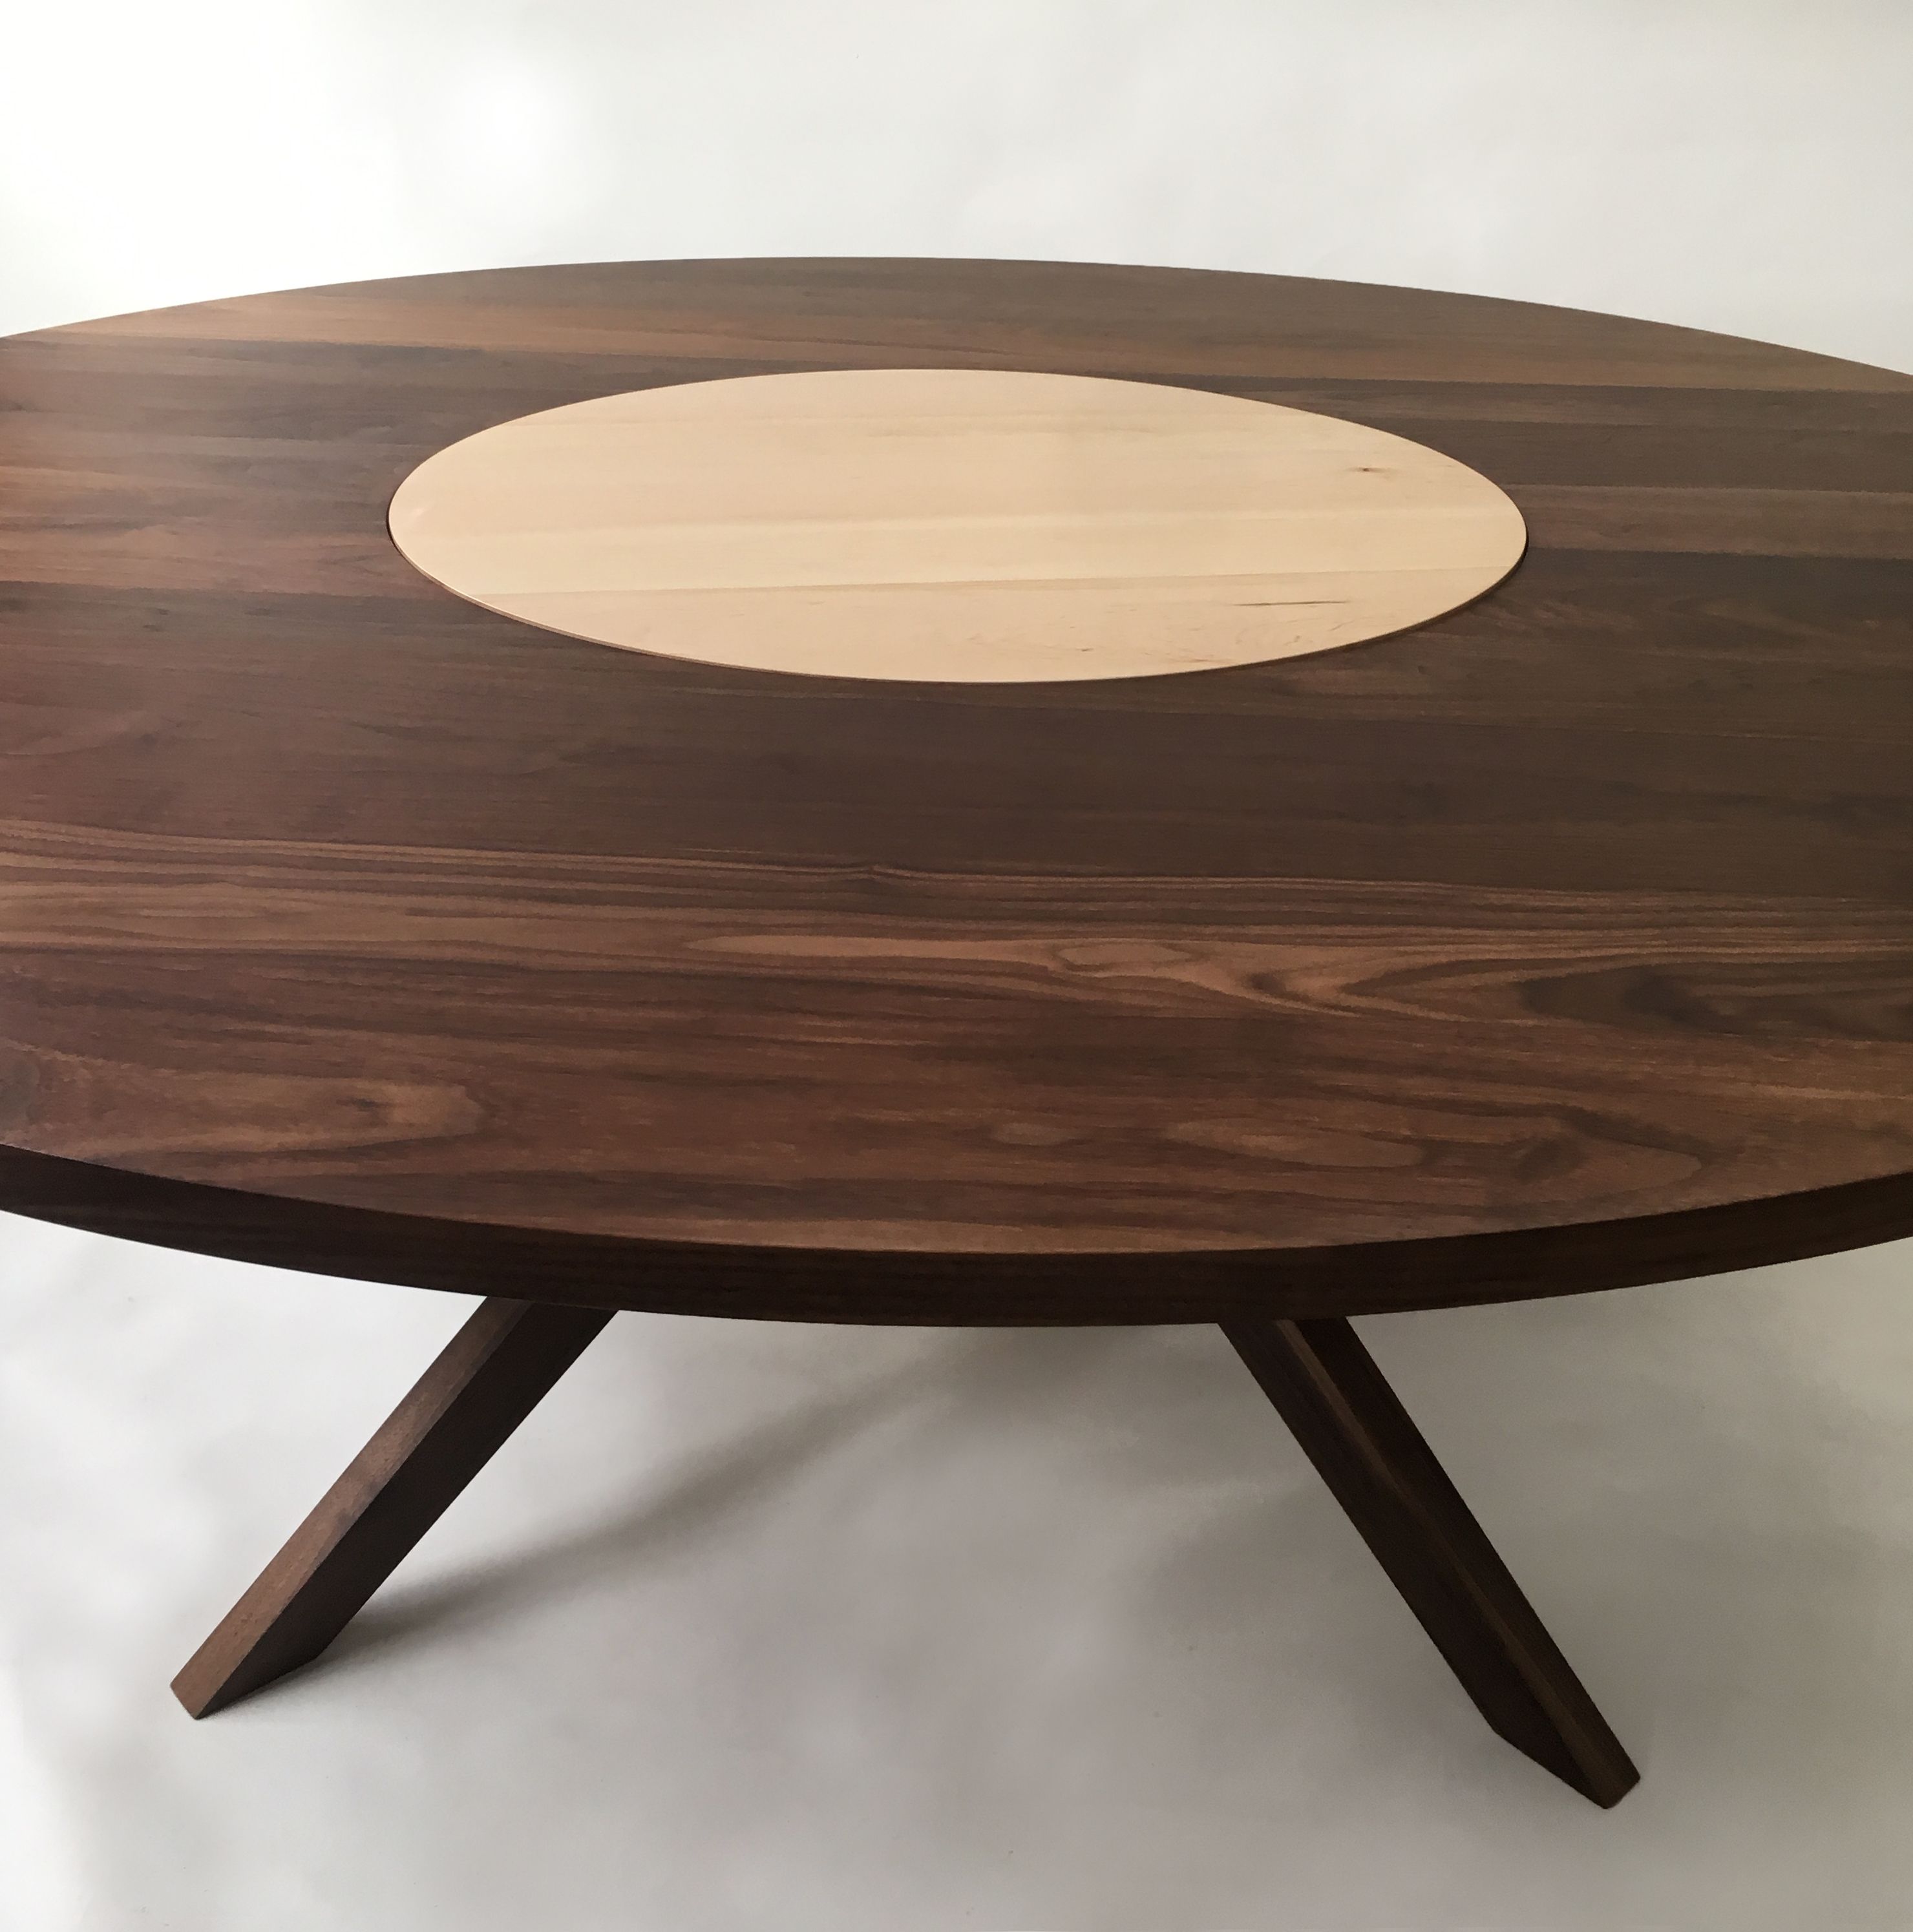 Teak Dining Table With Lazy Susan: Convenience At Your Fingertips